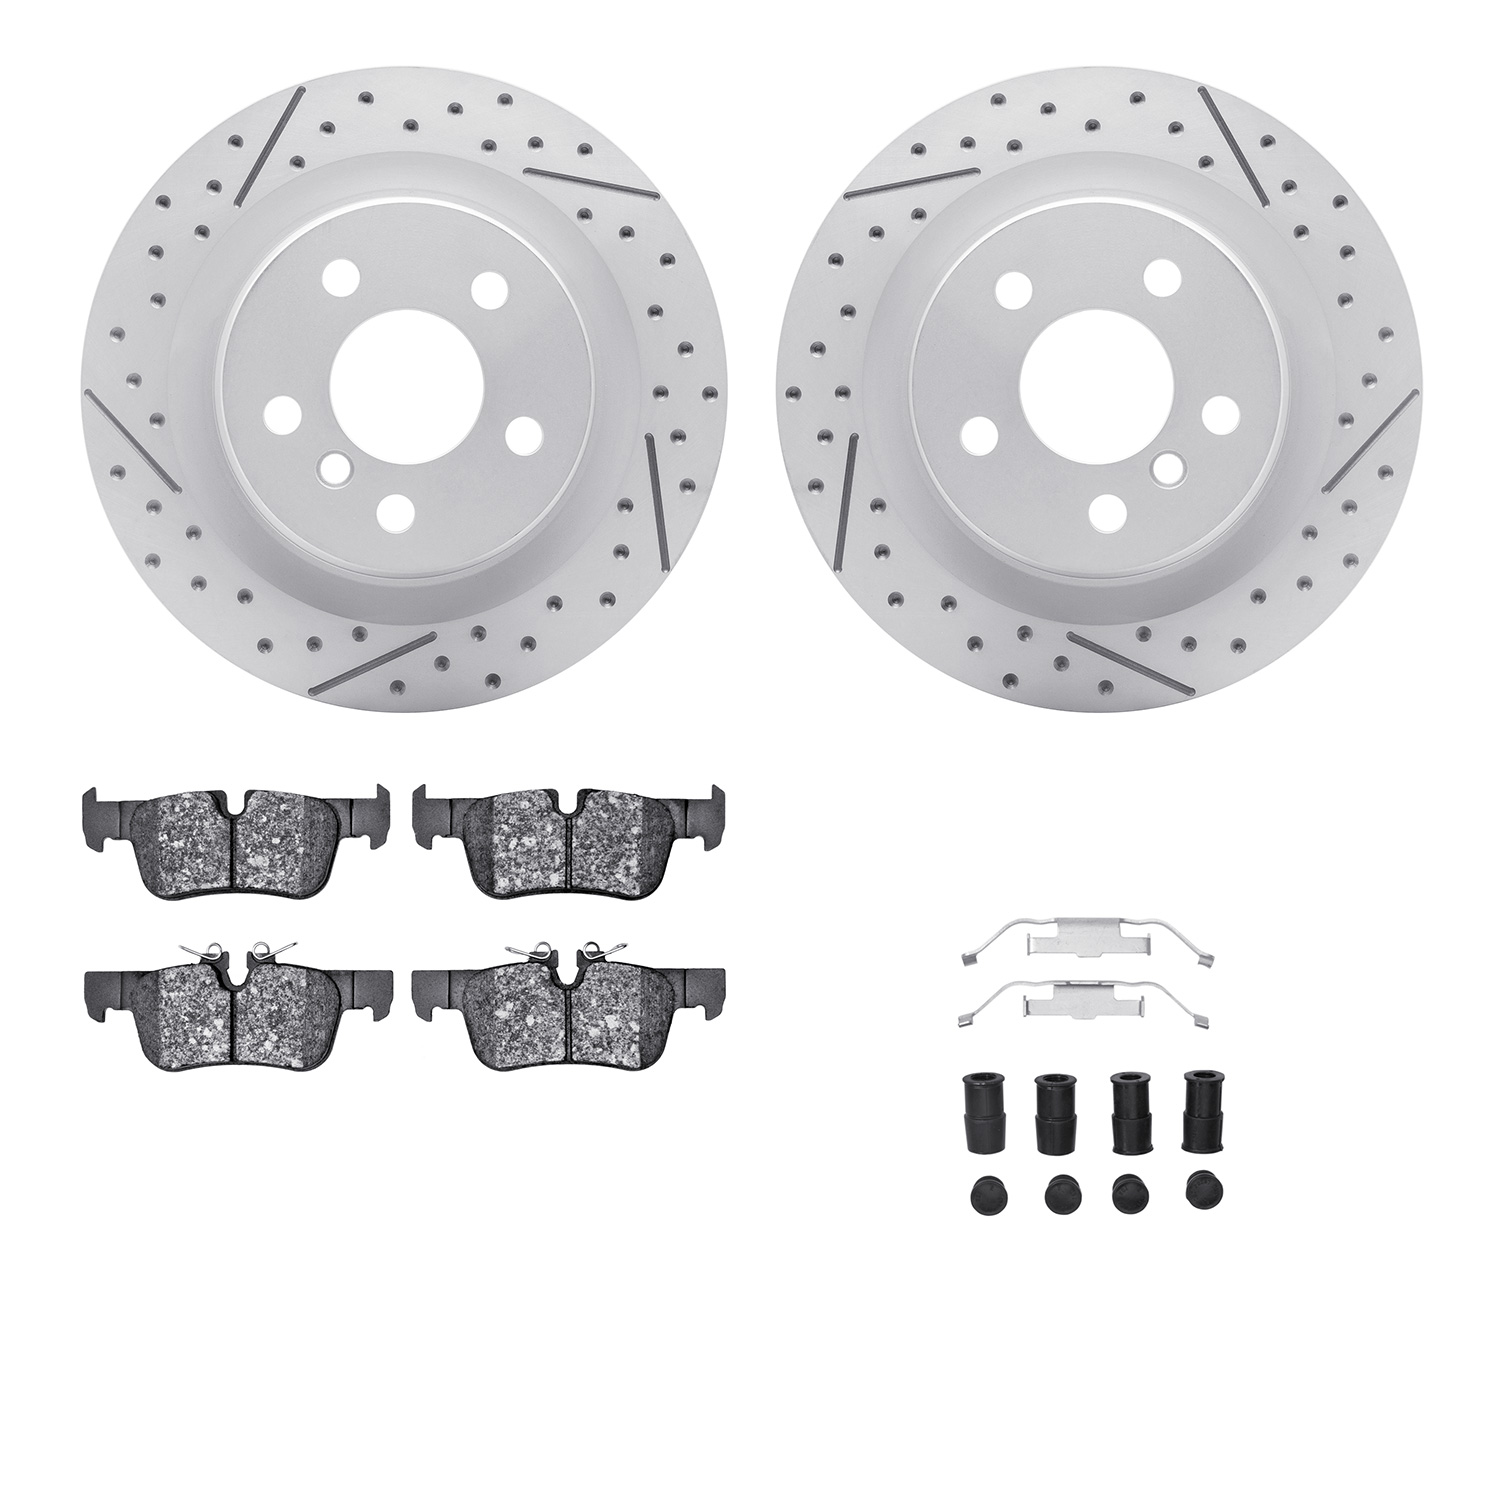 2512-31118 Geoperformance Drilled/Slotted Rotors w/5000 Advanced Brake Pads Kit & Hardware, Fits Select Multiple Makes/Models, P